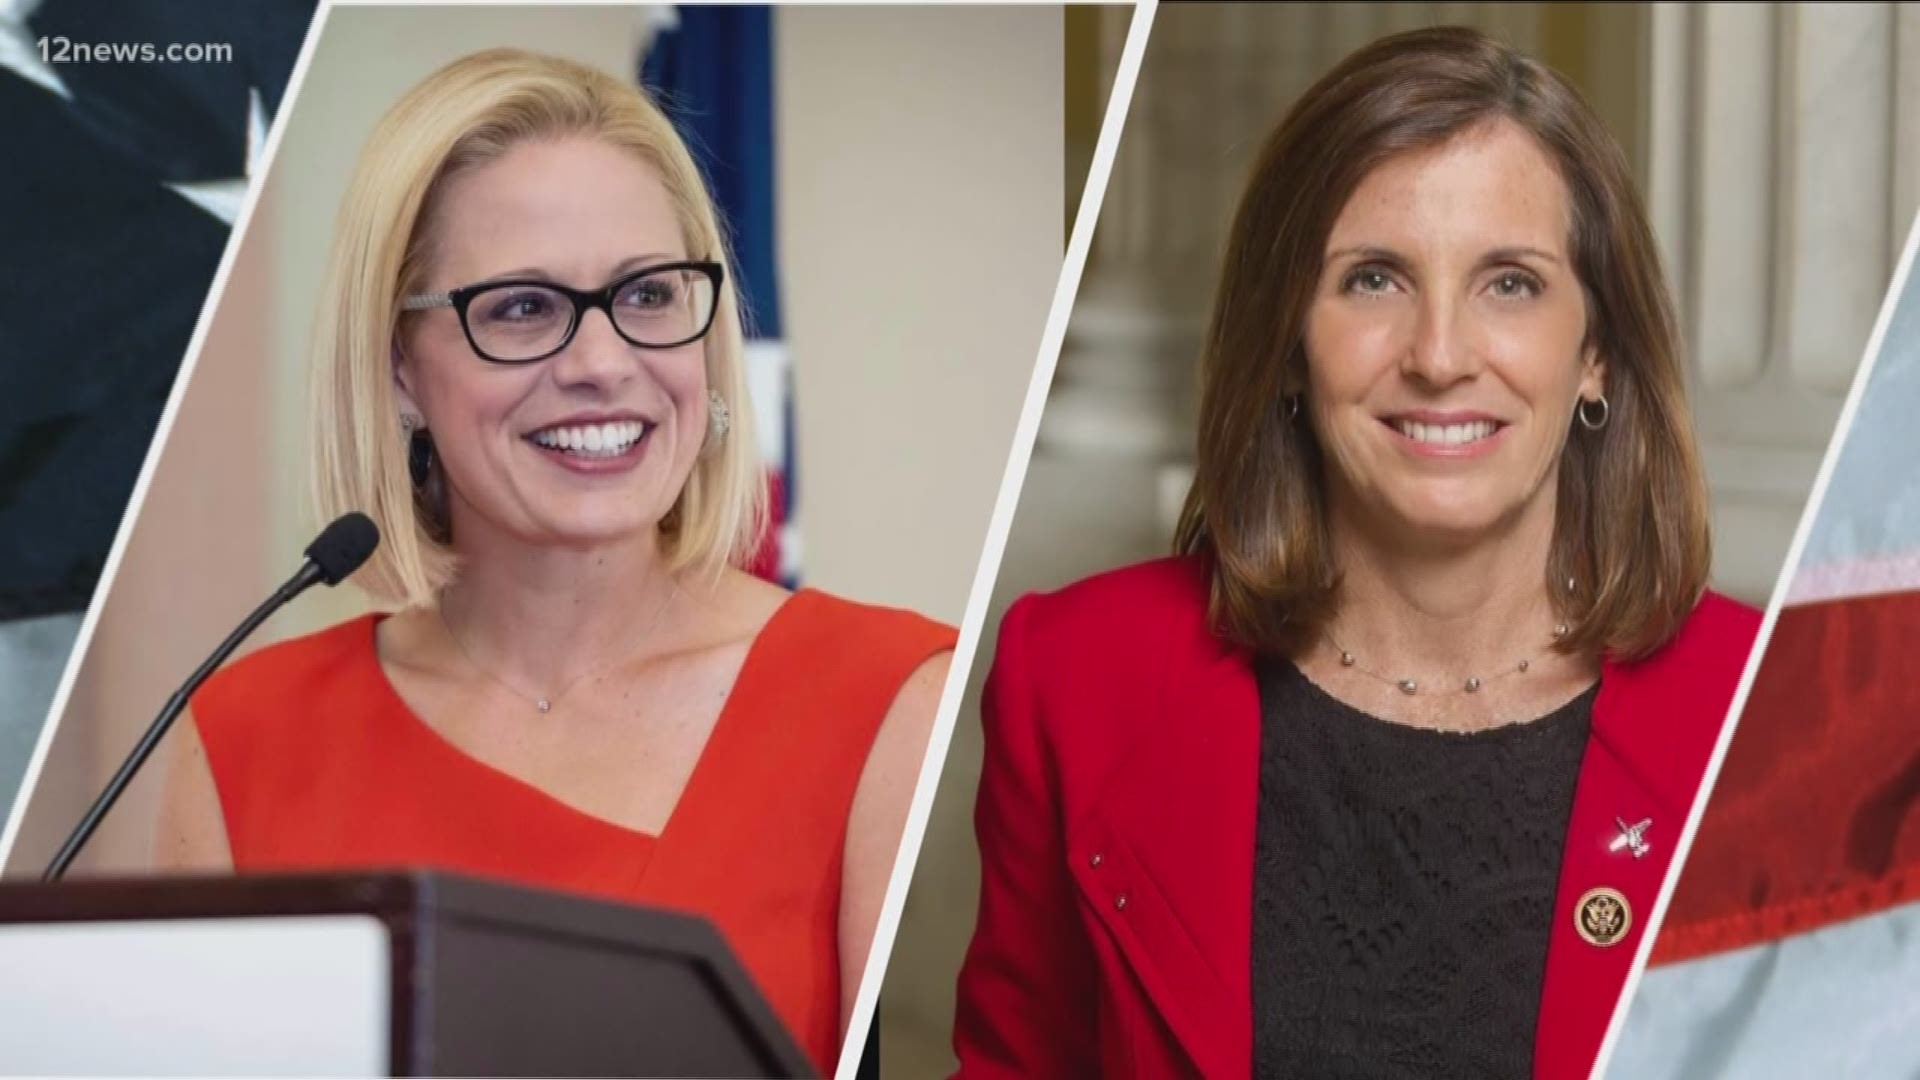 There are a lot of political ads running air right now, and they all have contradicting messages. We fact check some of the ads for the Sinema and McSally campaigns.